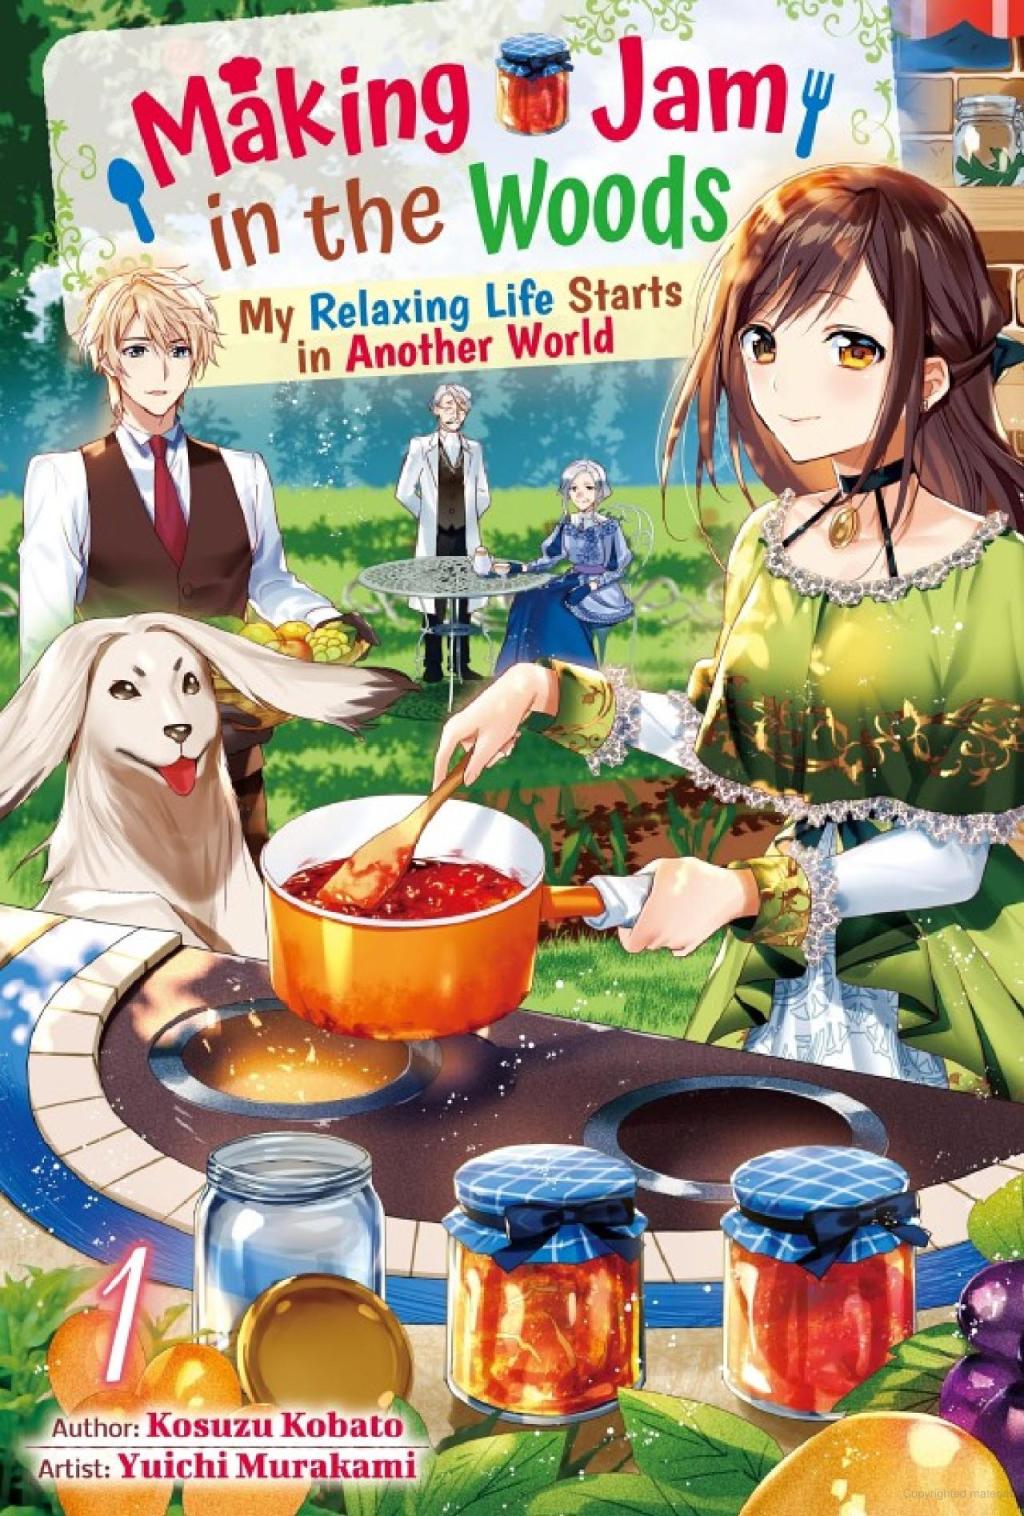 Making Jam in the Woods: My Relaxing Life Starts in Another World Vol. 1 Review